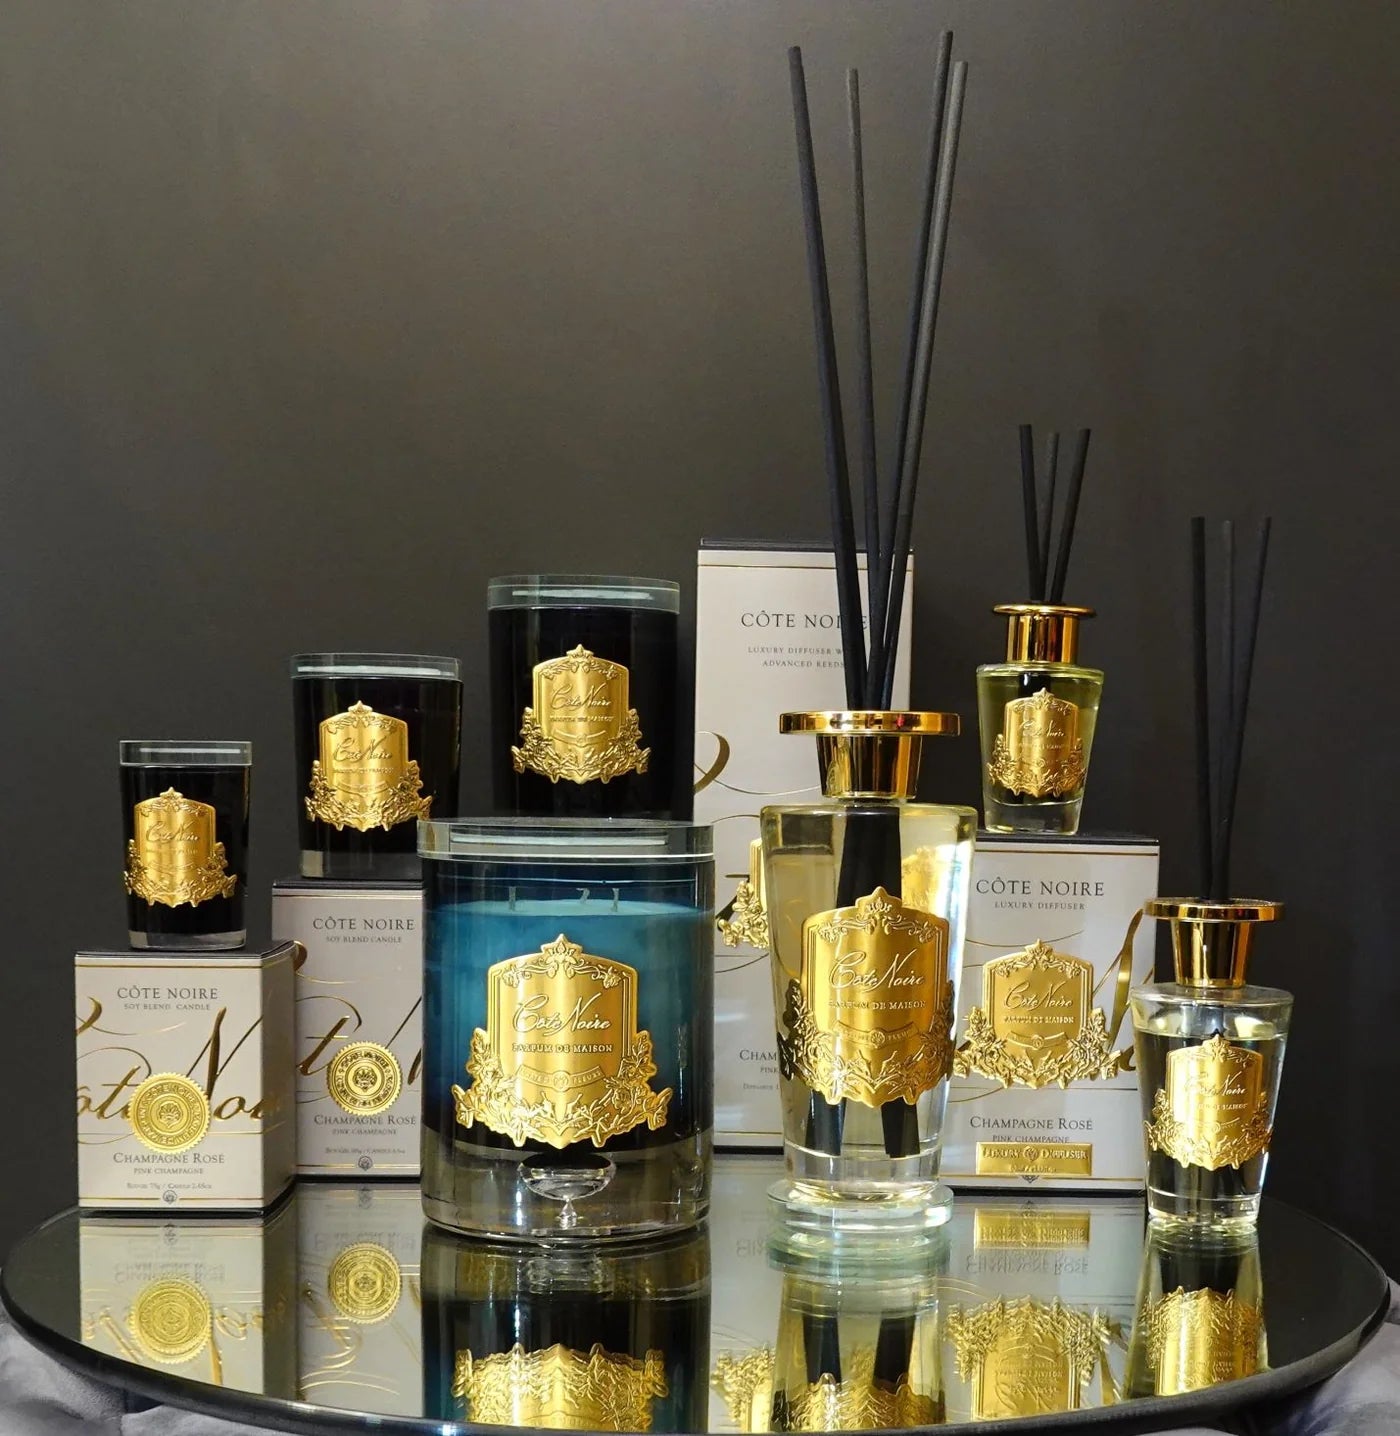 Côte Noire Candles and Diffusers